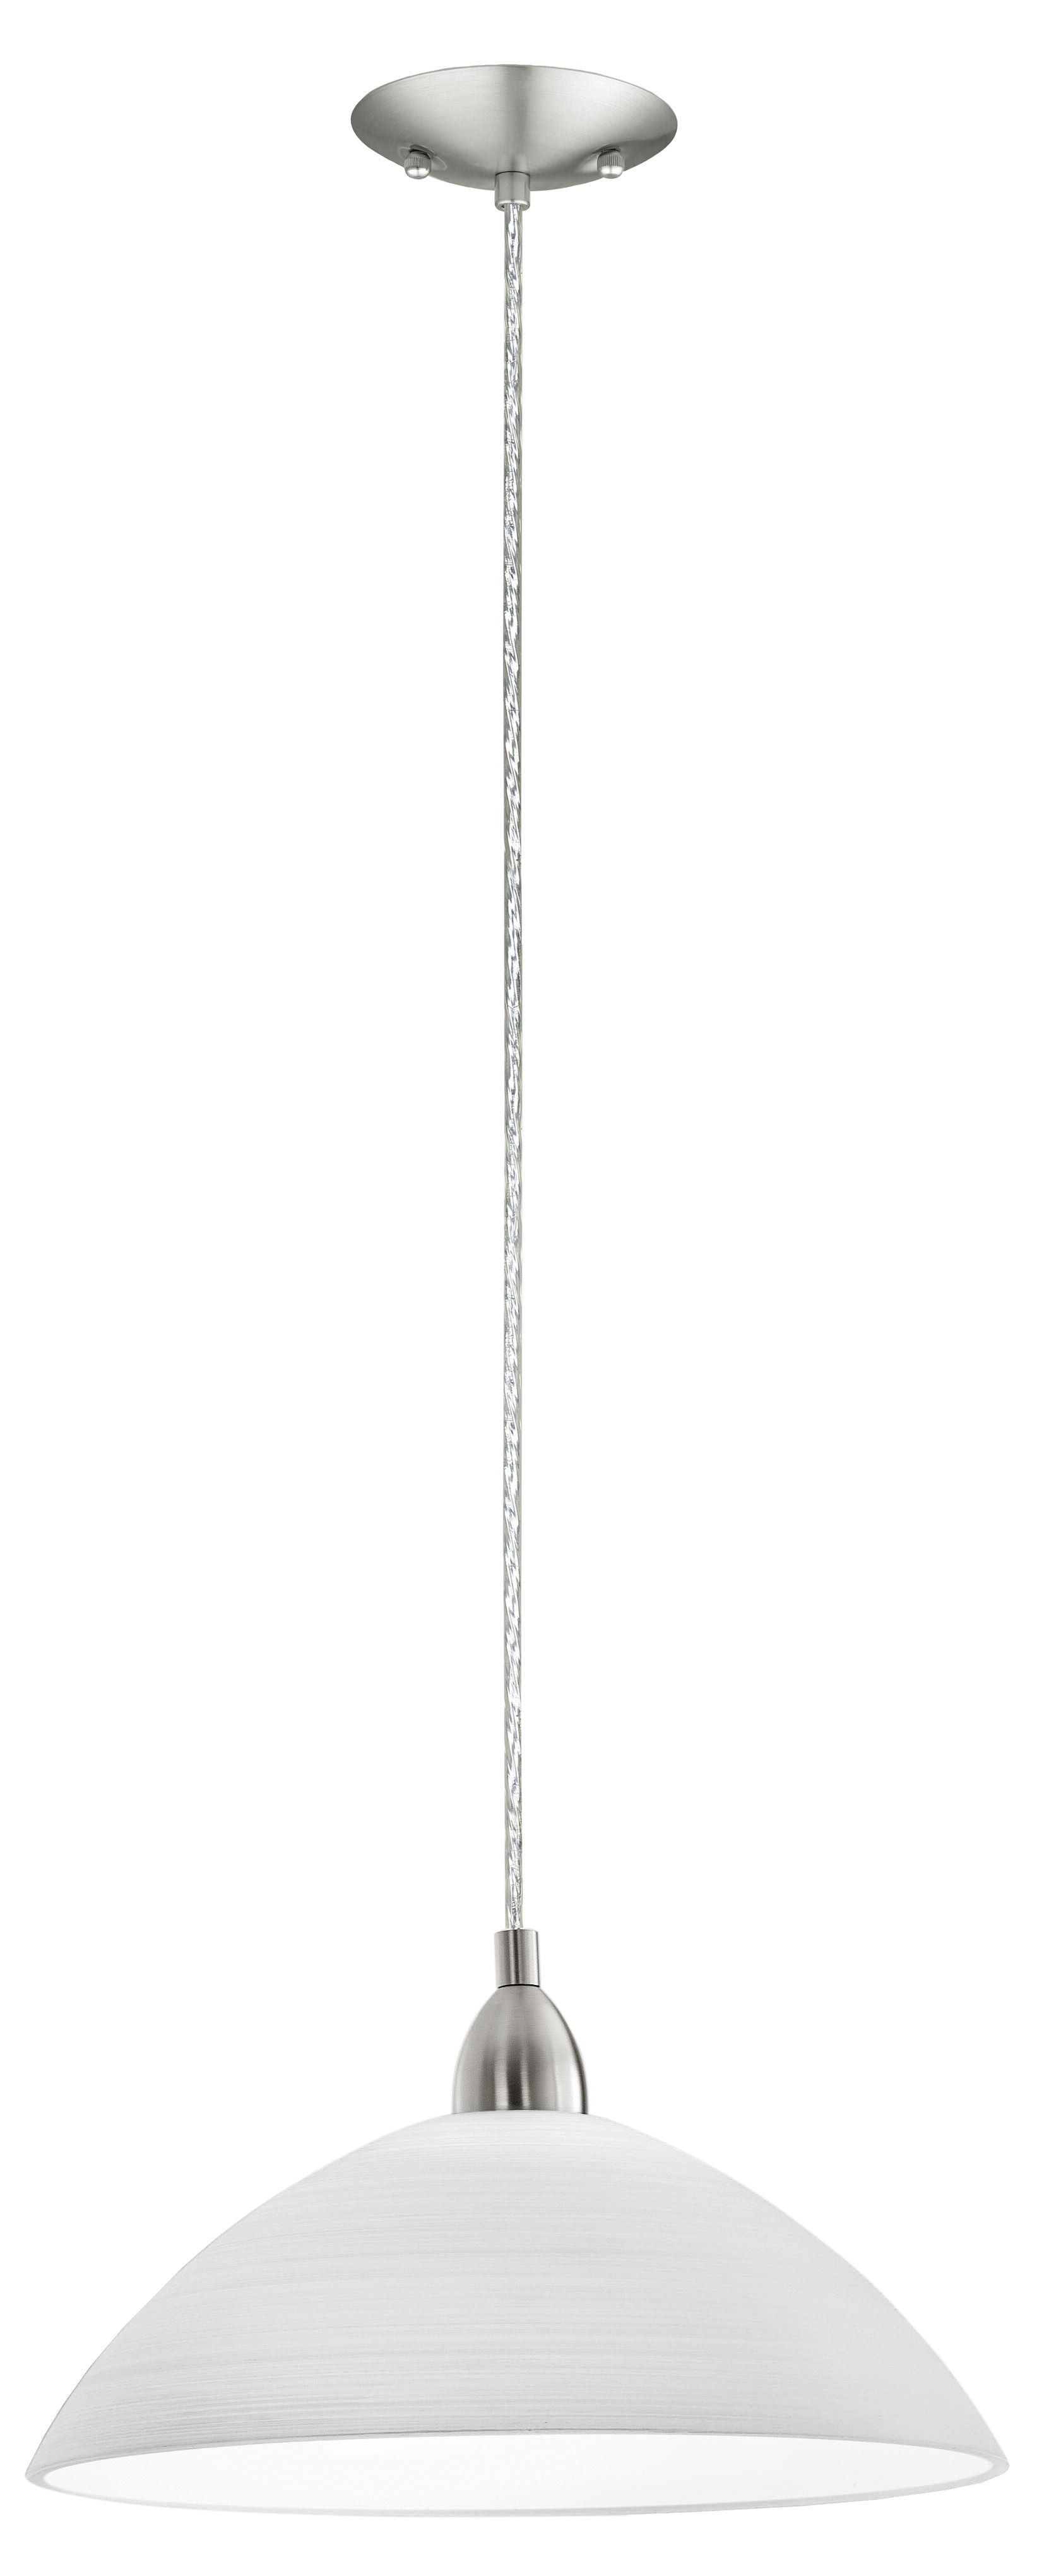 Lord 3 Pendant Stainless steel - 88491A | EGLO